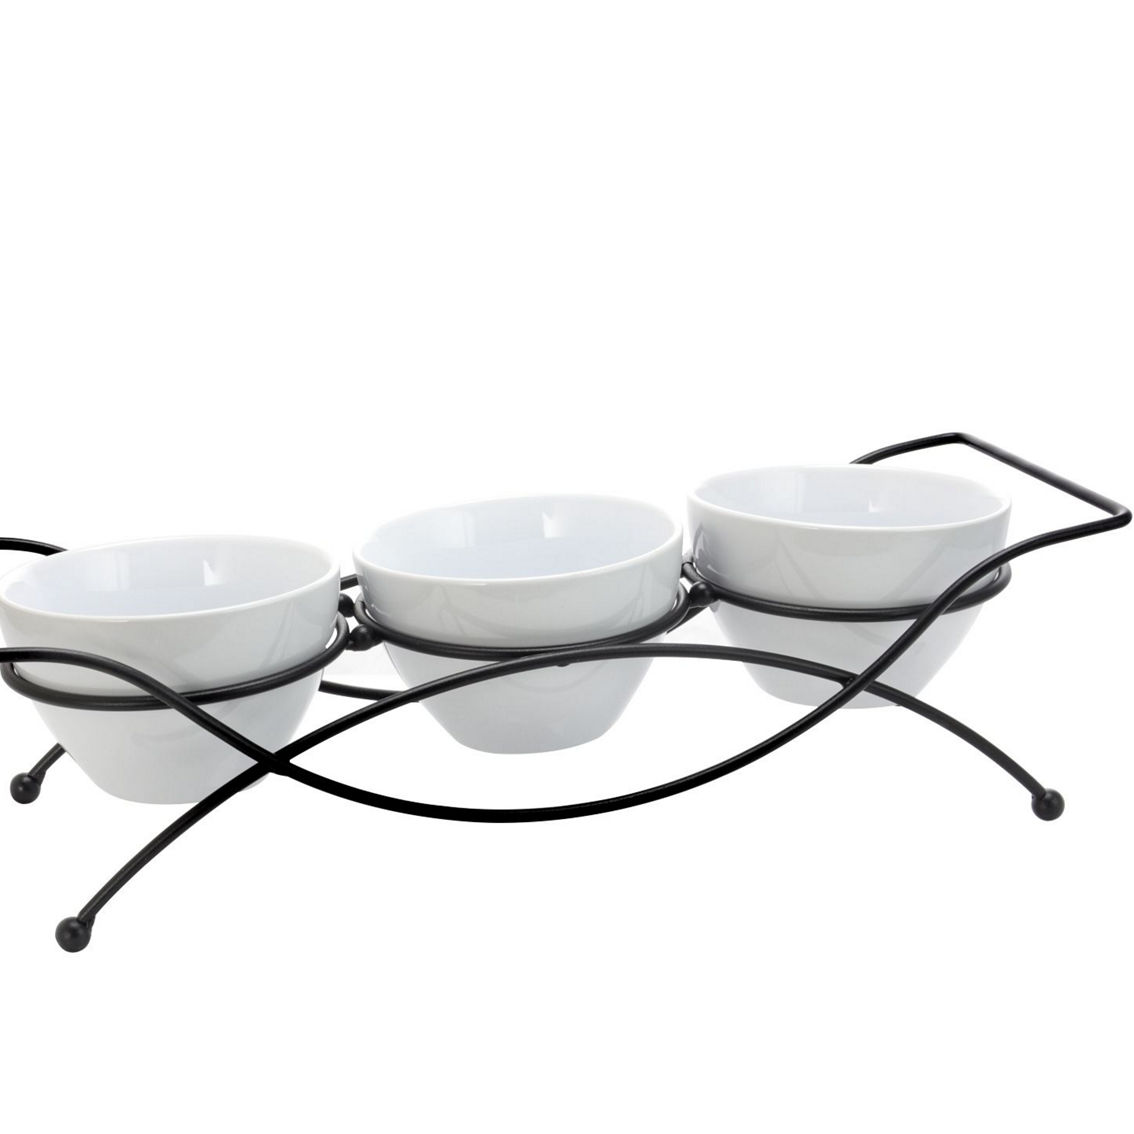 Gibson Splendid Grace 4 pc Serving Set with Metal Rack in White - Image 5 of 5